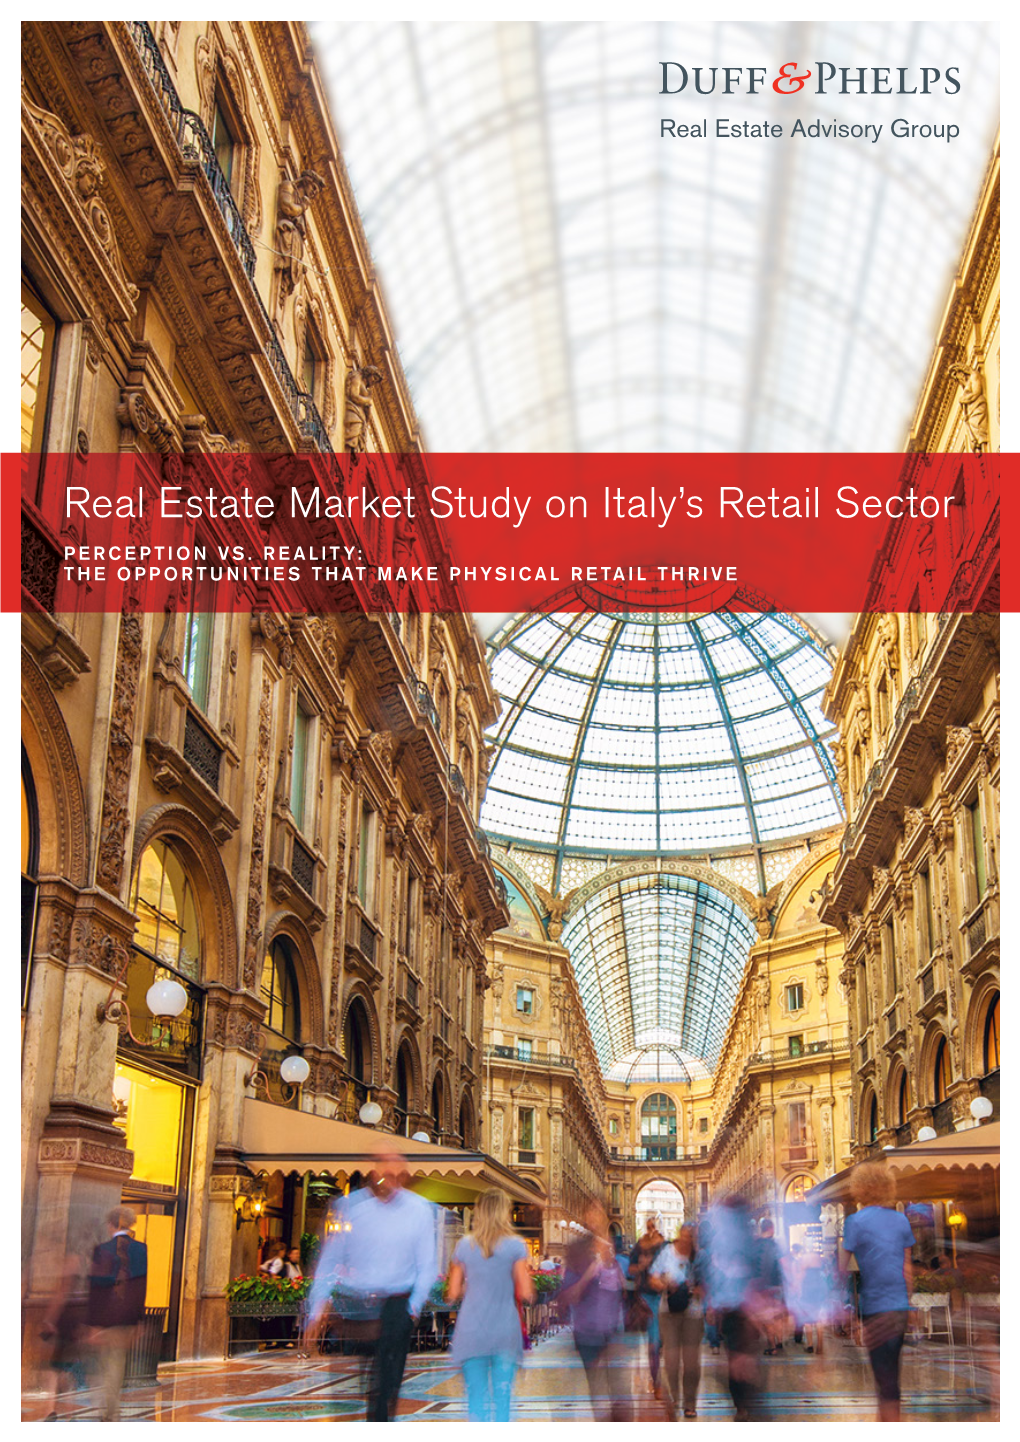 Real Estate Market Study on Italy's Retail Sector